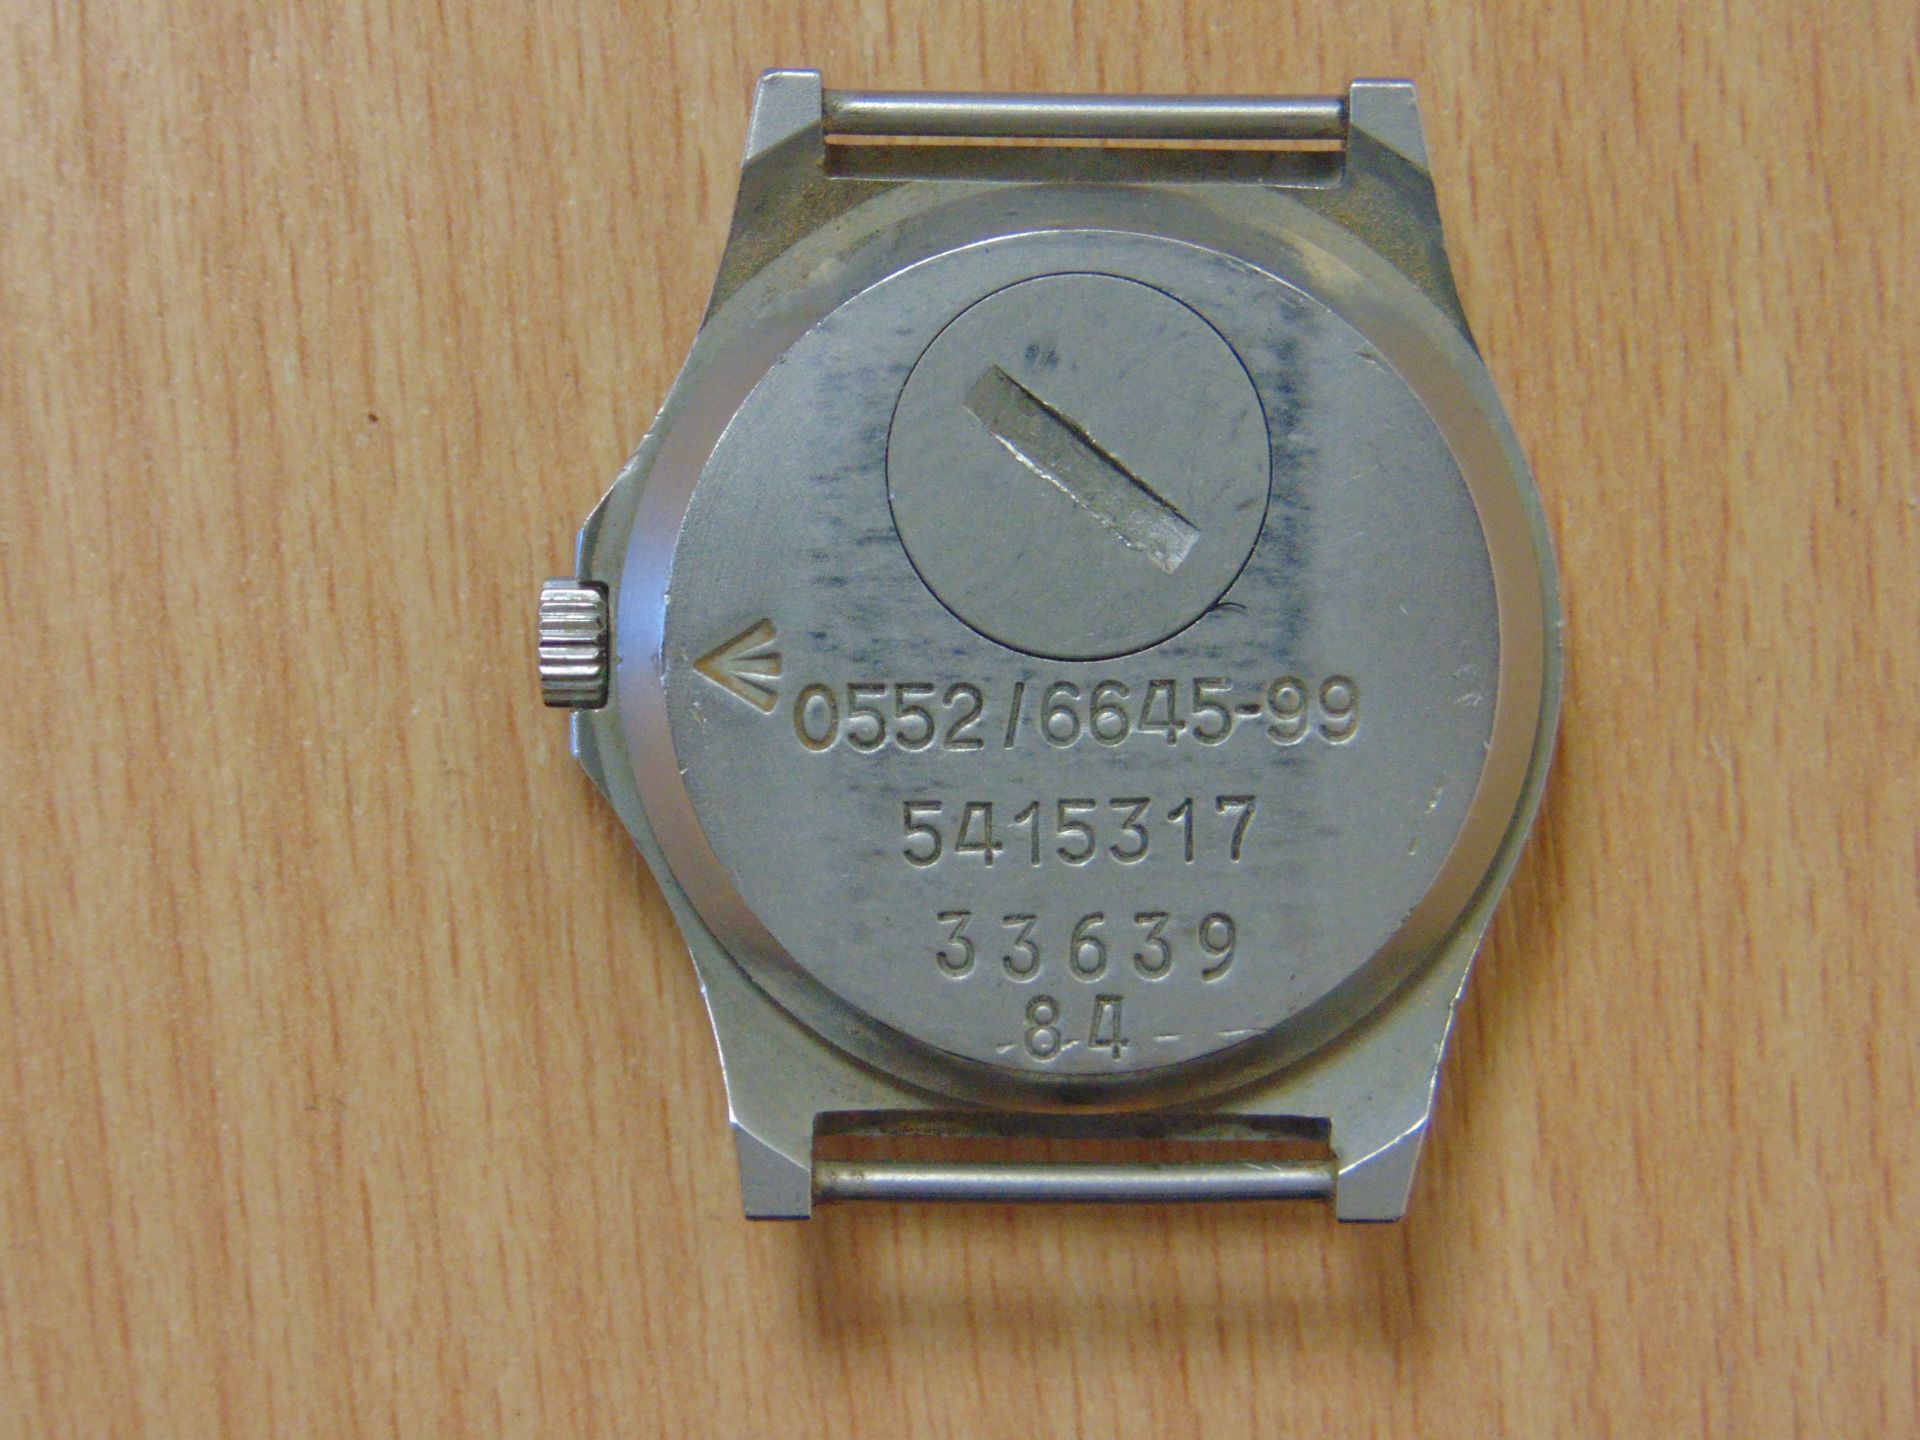 V. RARE FAT BOY CWC 0552 R. NAVY ISSUE SERVICE WATCH NATO MARKS DATED 1984 - Image 7 of 7